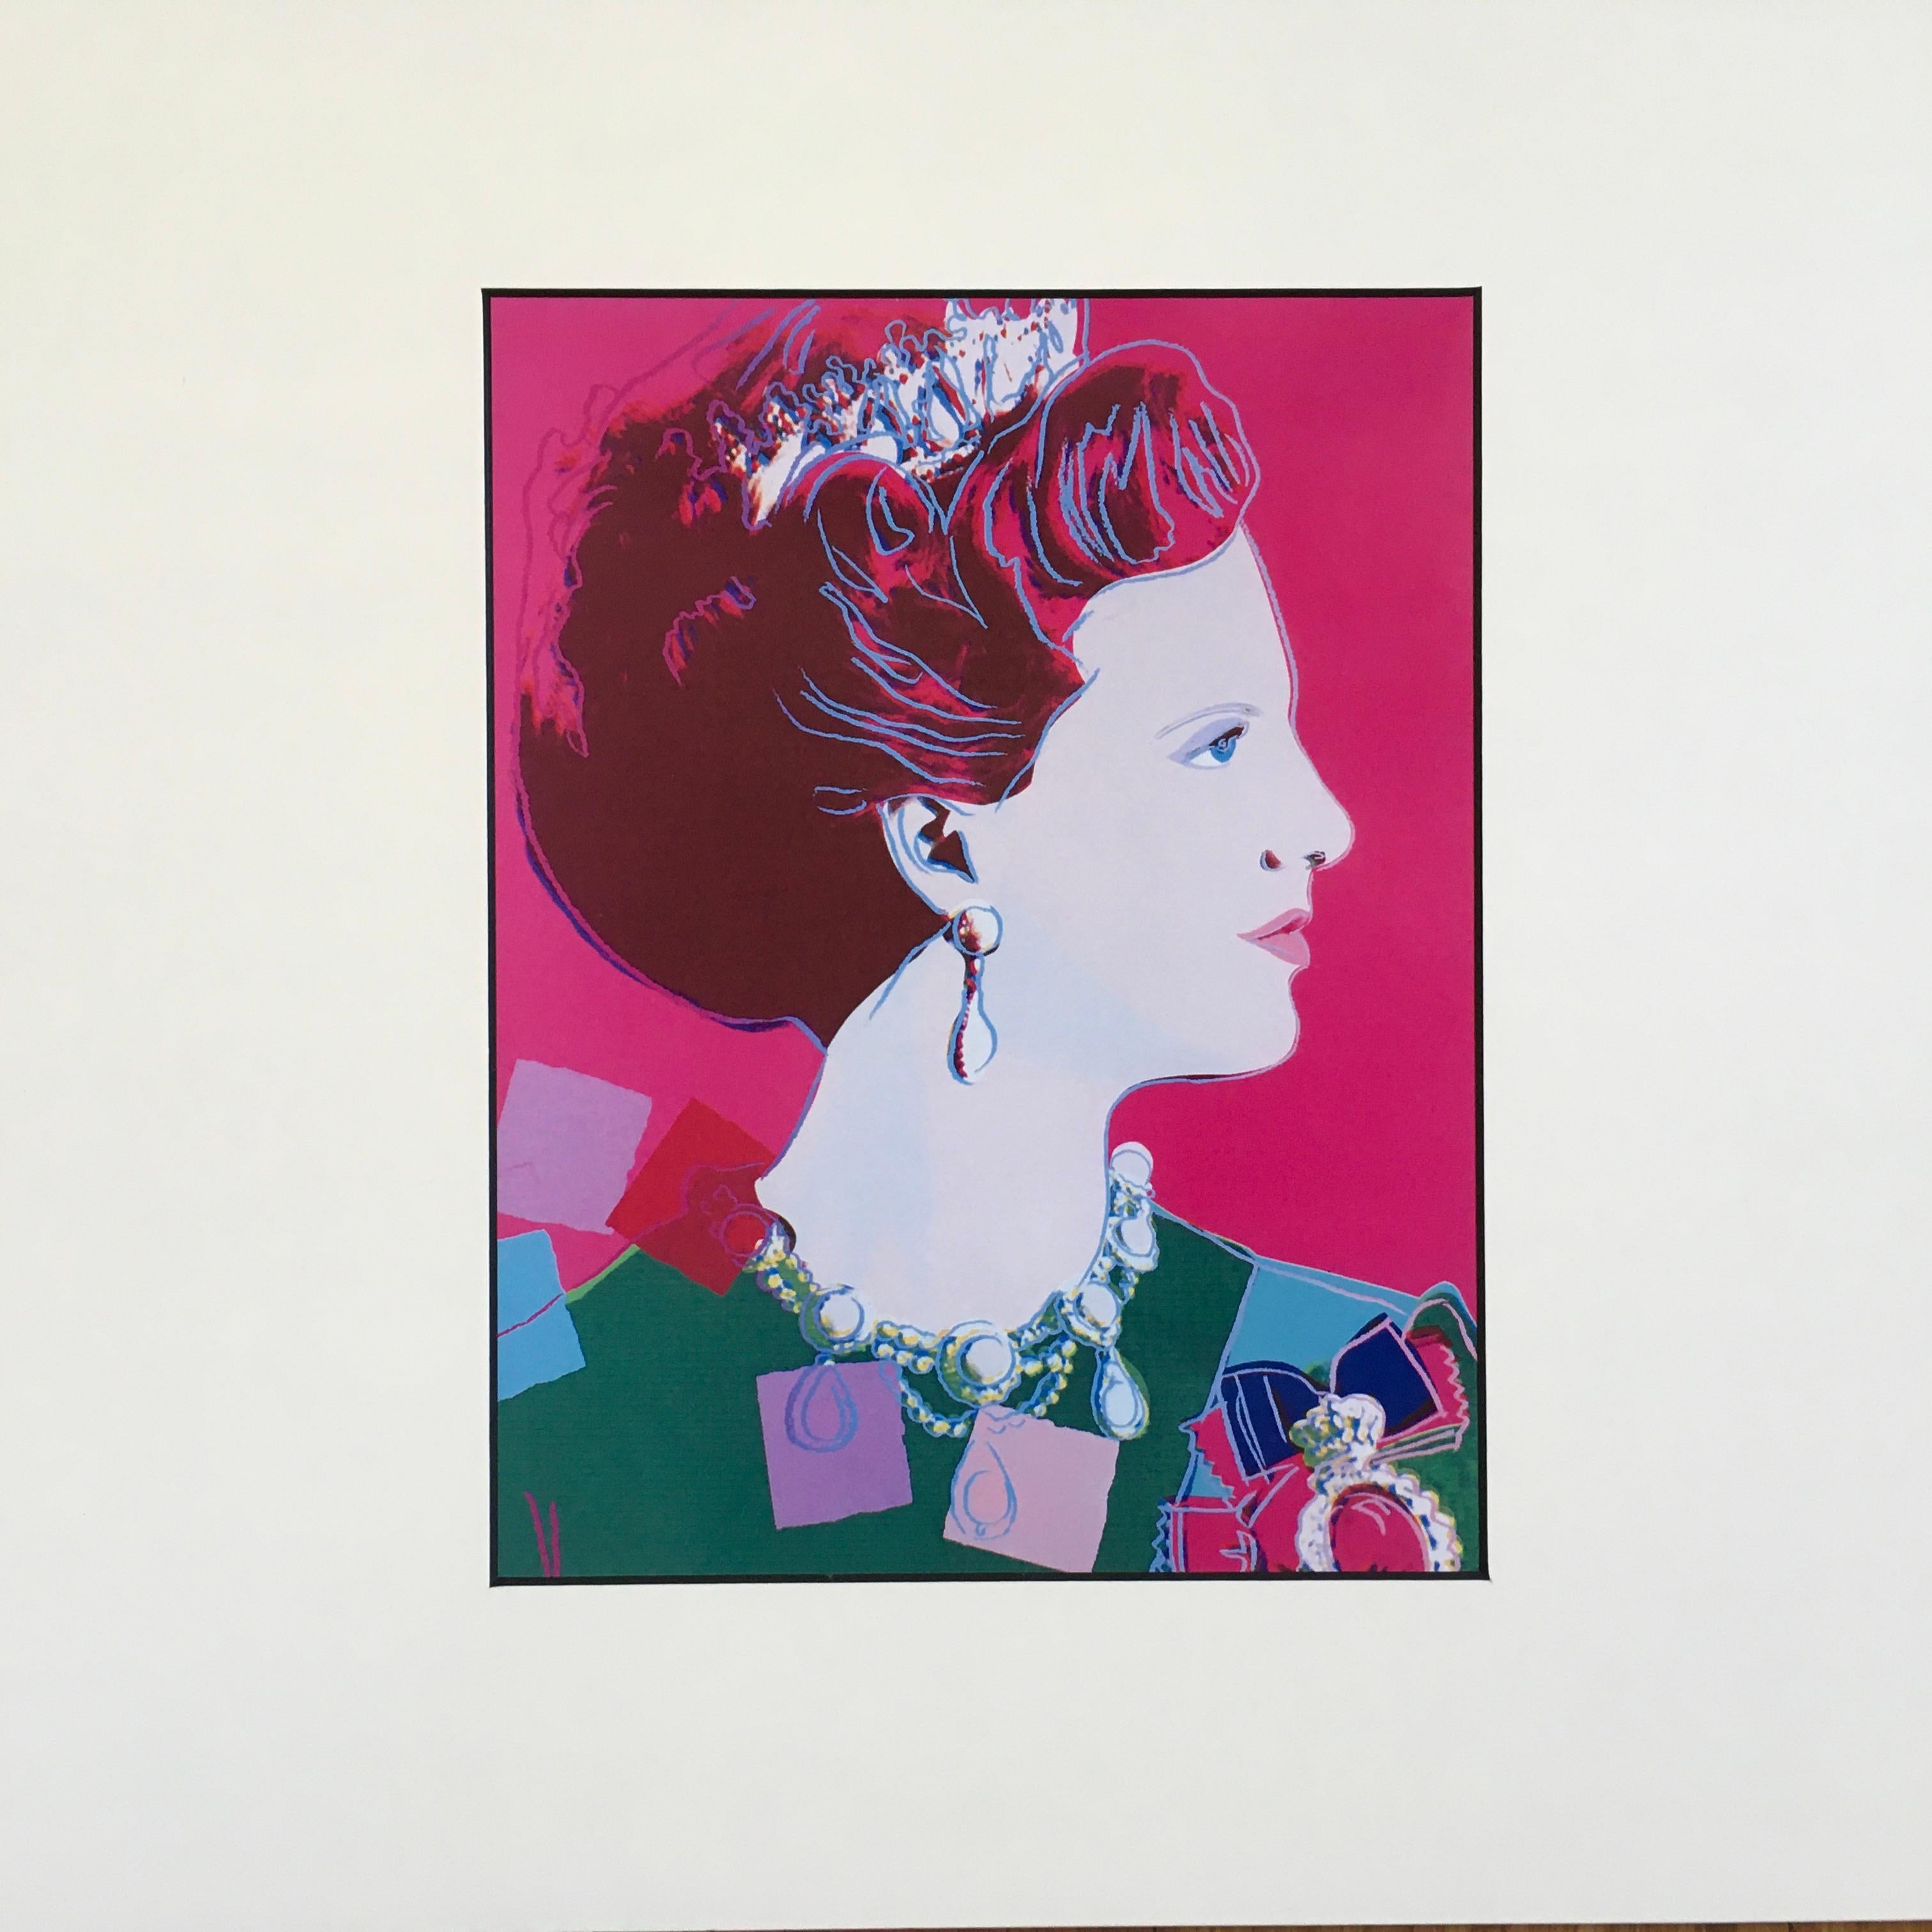 andy warhol queen margrethe